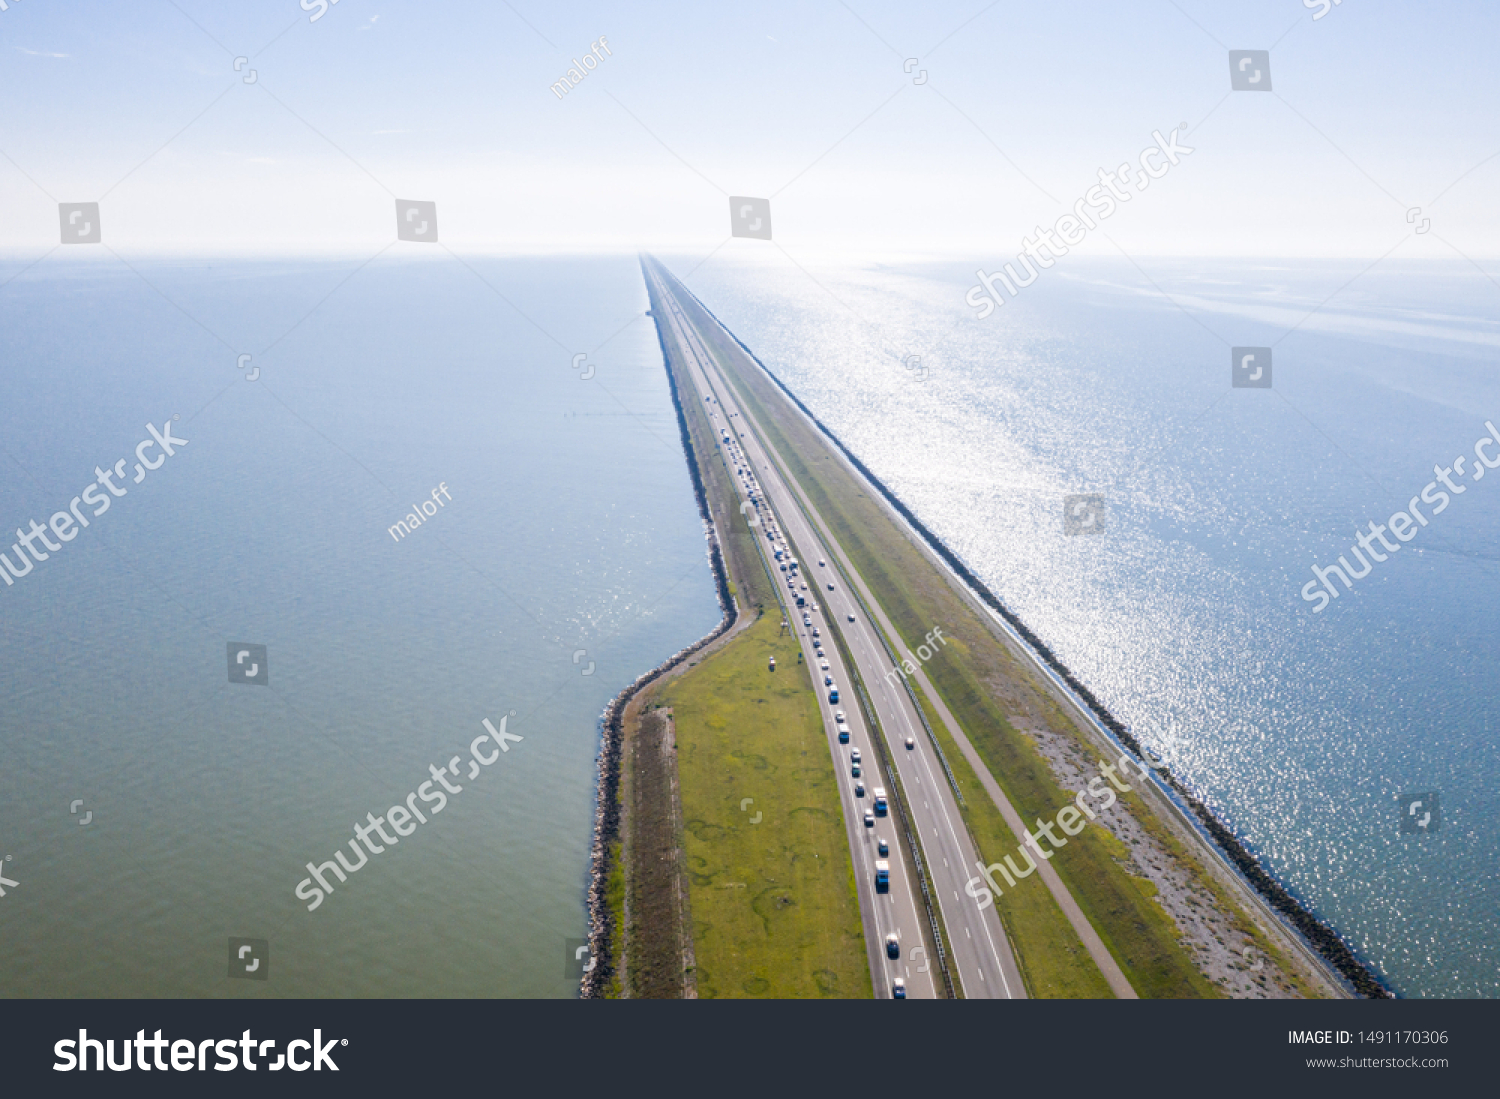 Afsluitdijk, a major dam and causeway in the Netherlands, runs from Den Oever in North Holland to village of Zurich in Friesland province, damming off the Zuiderzee, salt water inlet of the North Sea. #1491170306